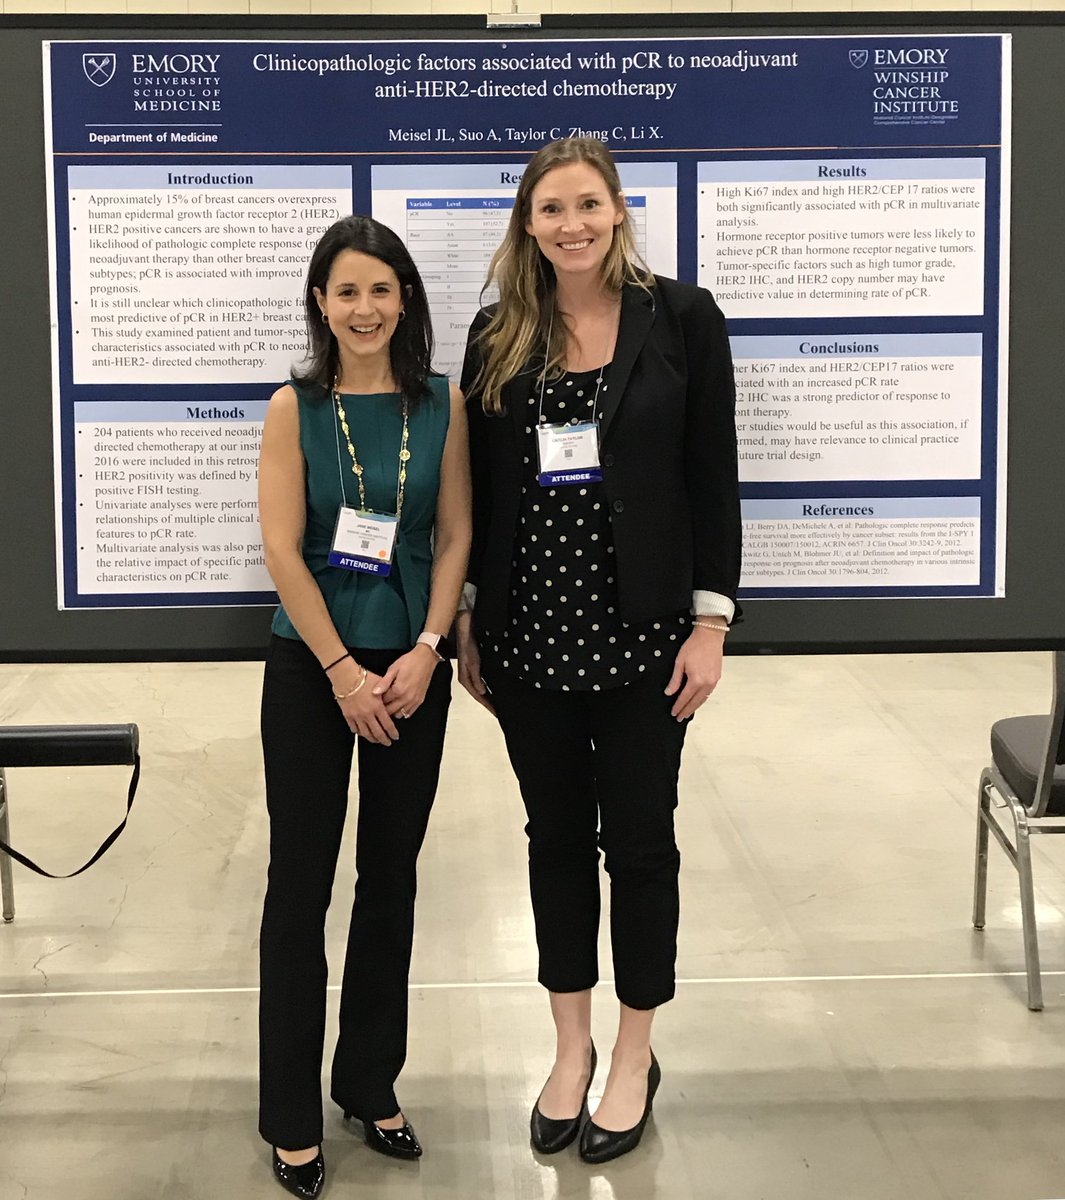 Winship medical oncologist Jane Meisel, MD (@jane_meisel) and incoming medical oncology fellow Caitlin Taylor, MD presented their poster at the 2018 San Antonio Breast Cancer Symposium. #SABCS18